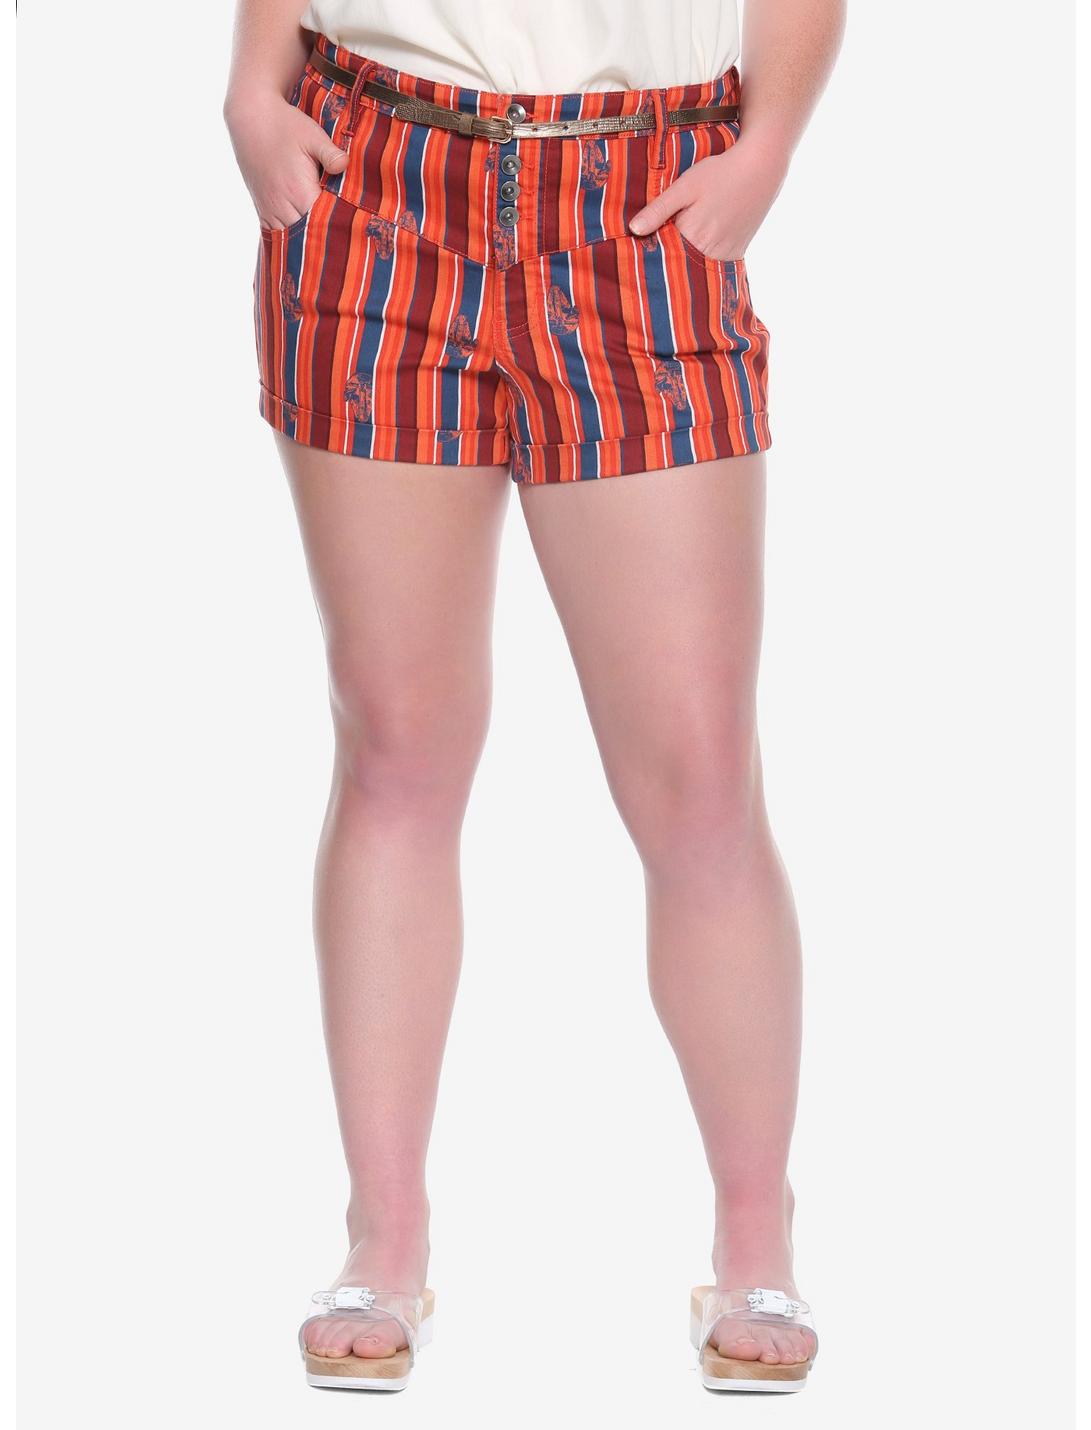 Her Universe Star Wars Solo Striped High-Waisted Shorts Plus Size, MULTI, hi-res